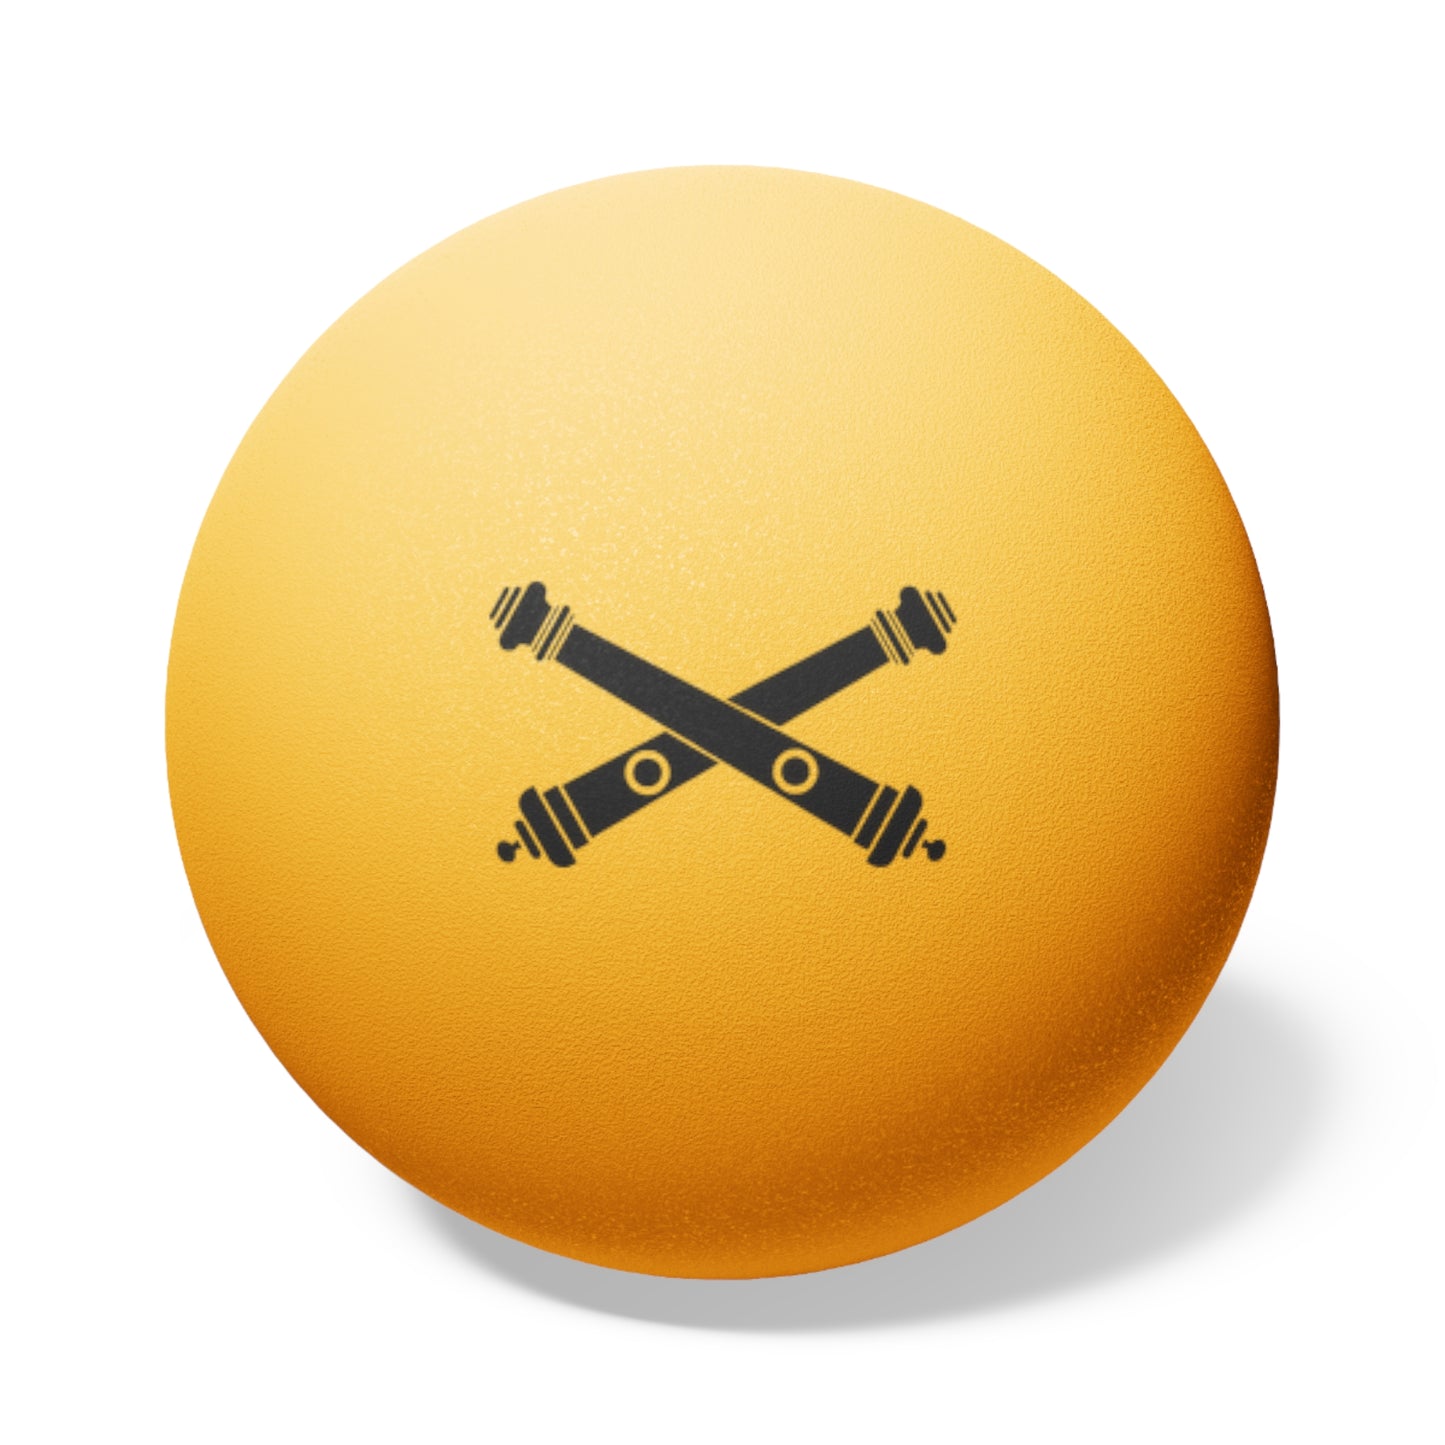 Artillery Crossed Cannons Beer Pong Ball Set